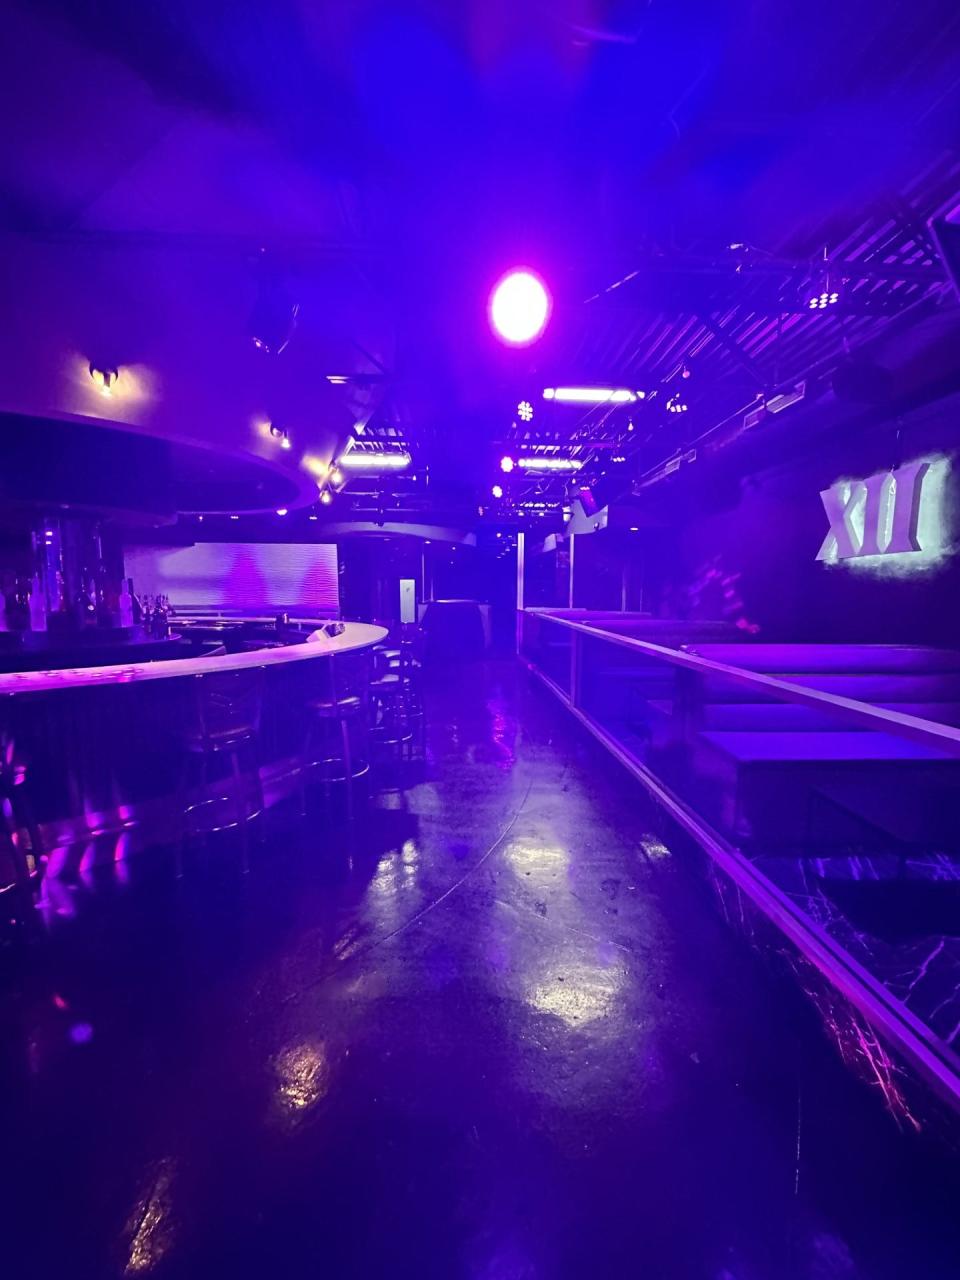 Inside DXII's purple-lit space is an open area with a round bar that customers on all sides can access. The booths on the right can be removed for live music nights.